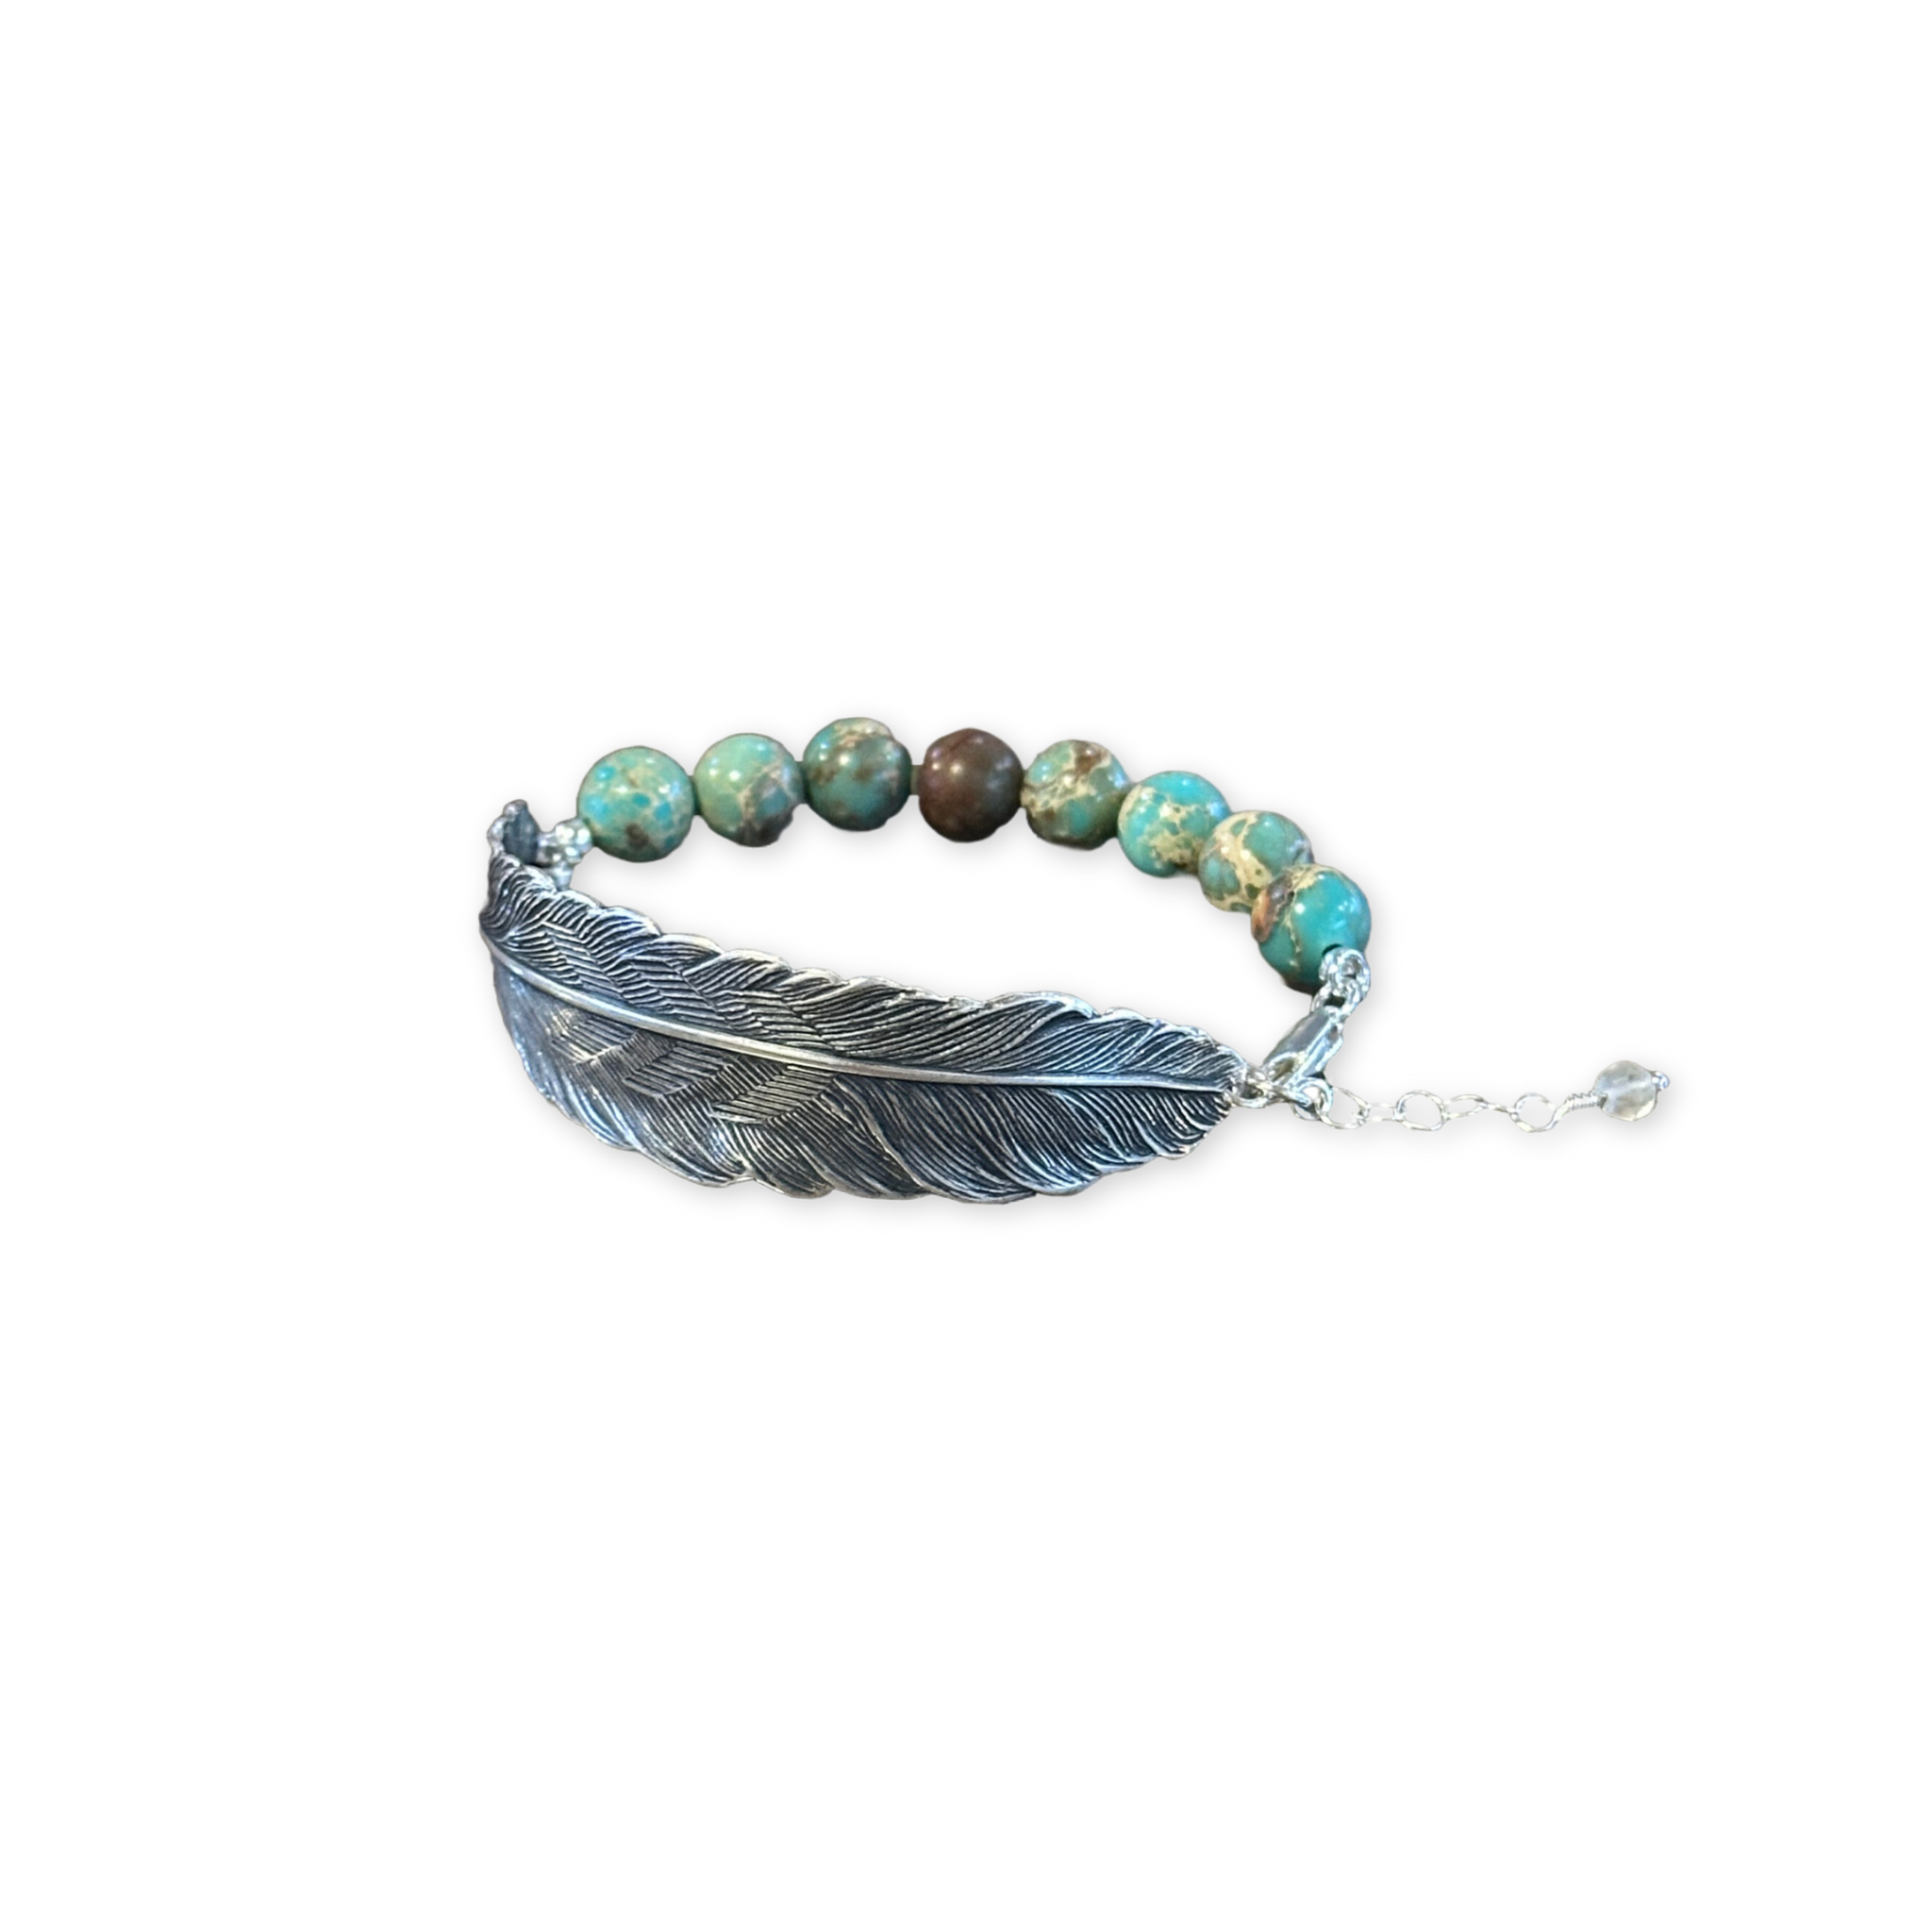 a bracelet with turquoise beads and a silver feather